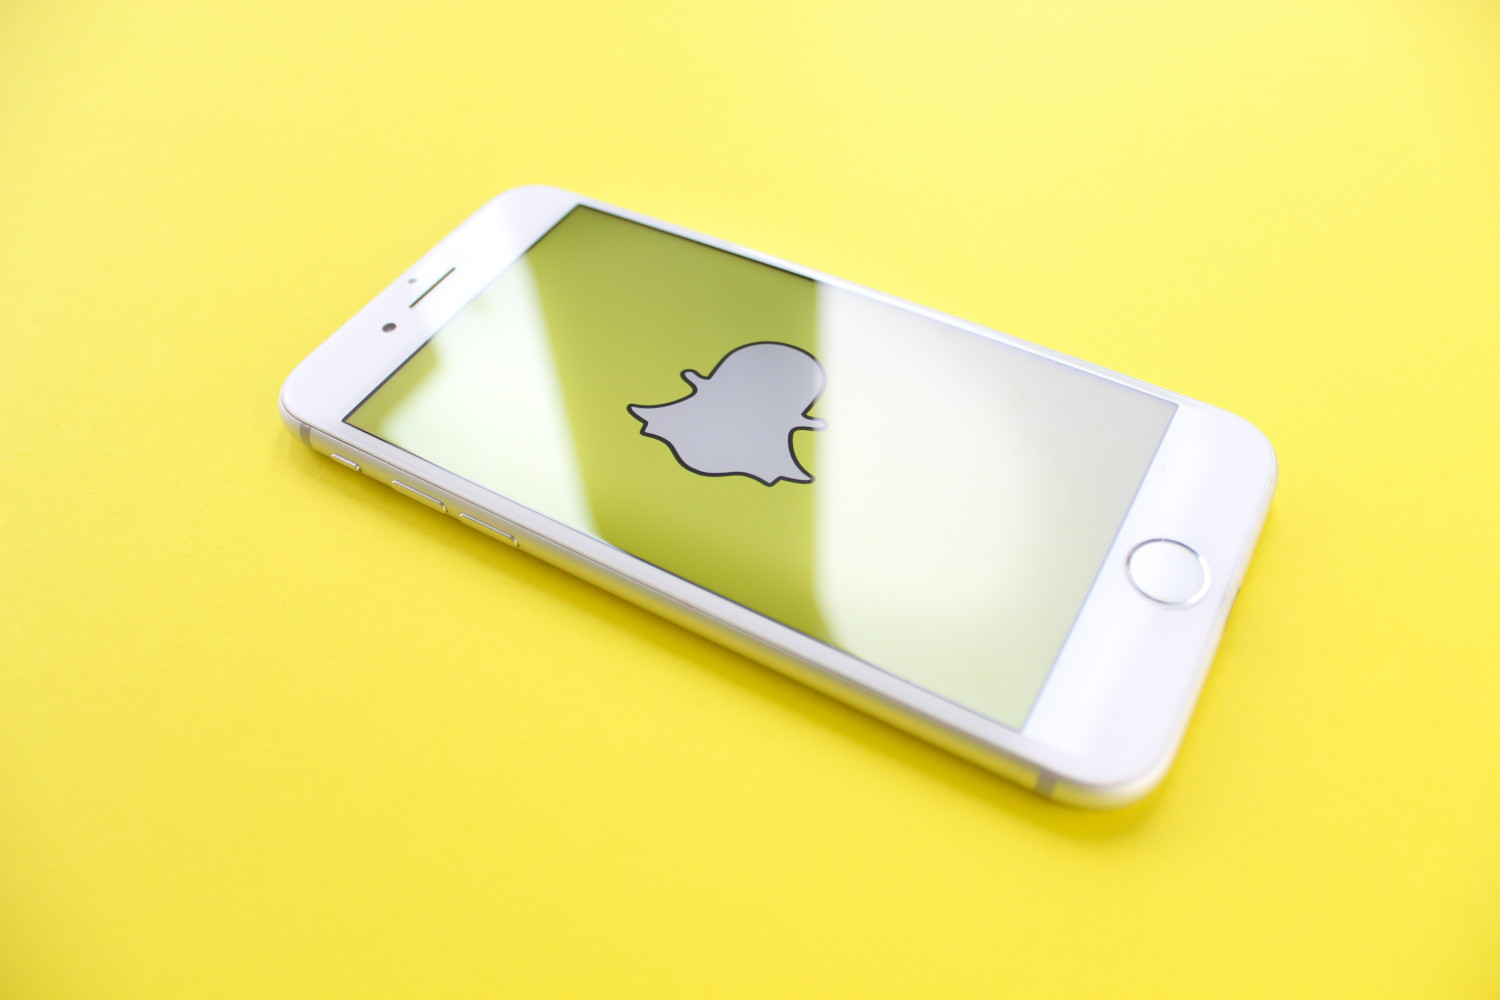 snapchat logo on phone on yellow table